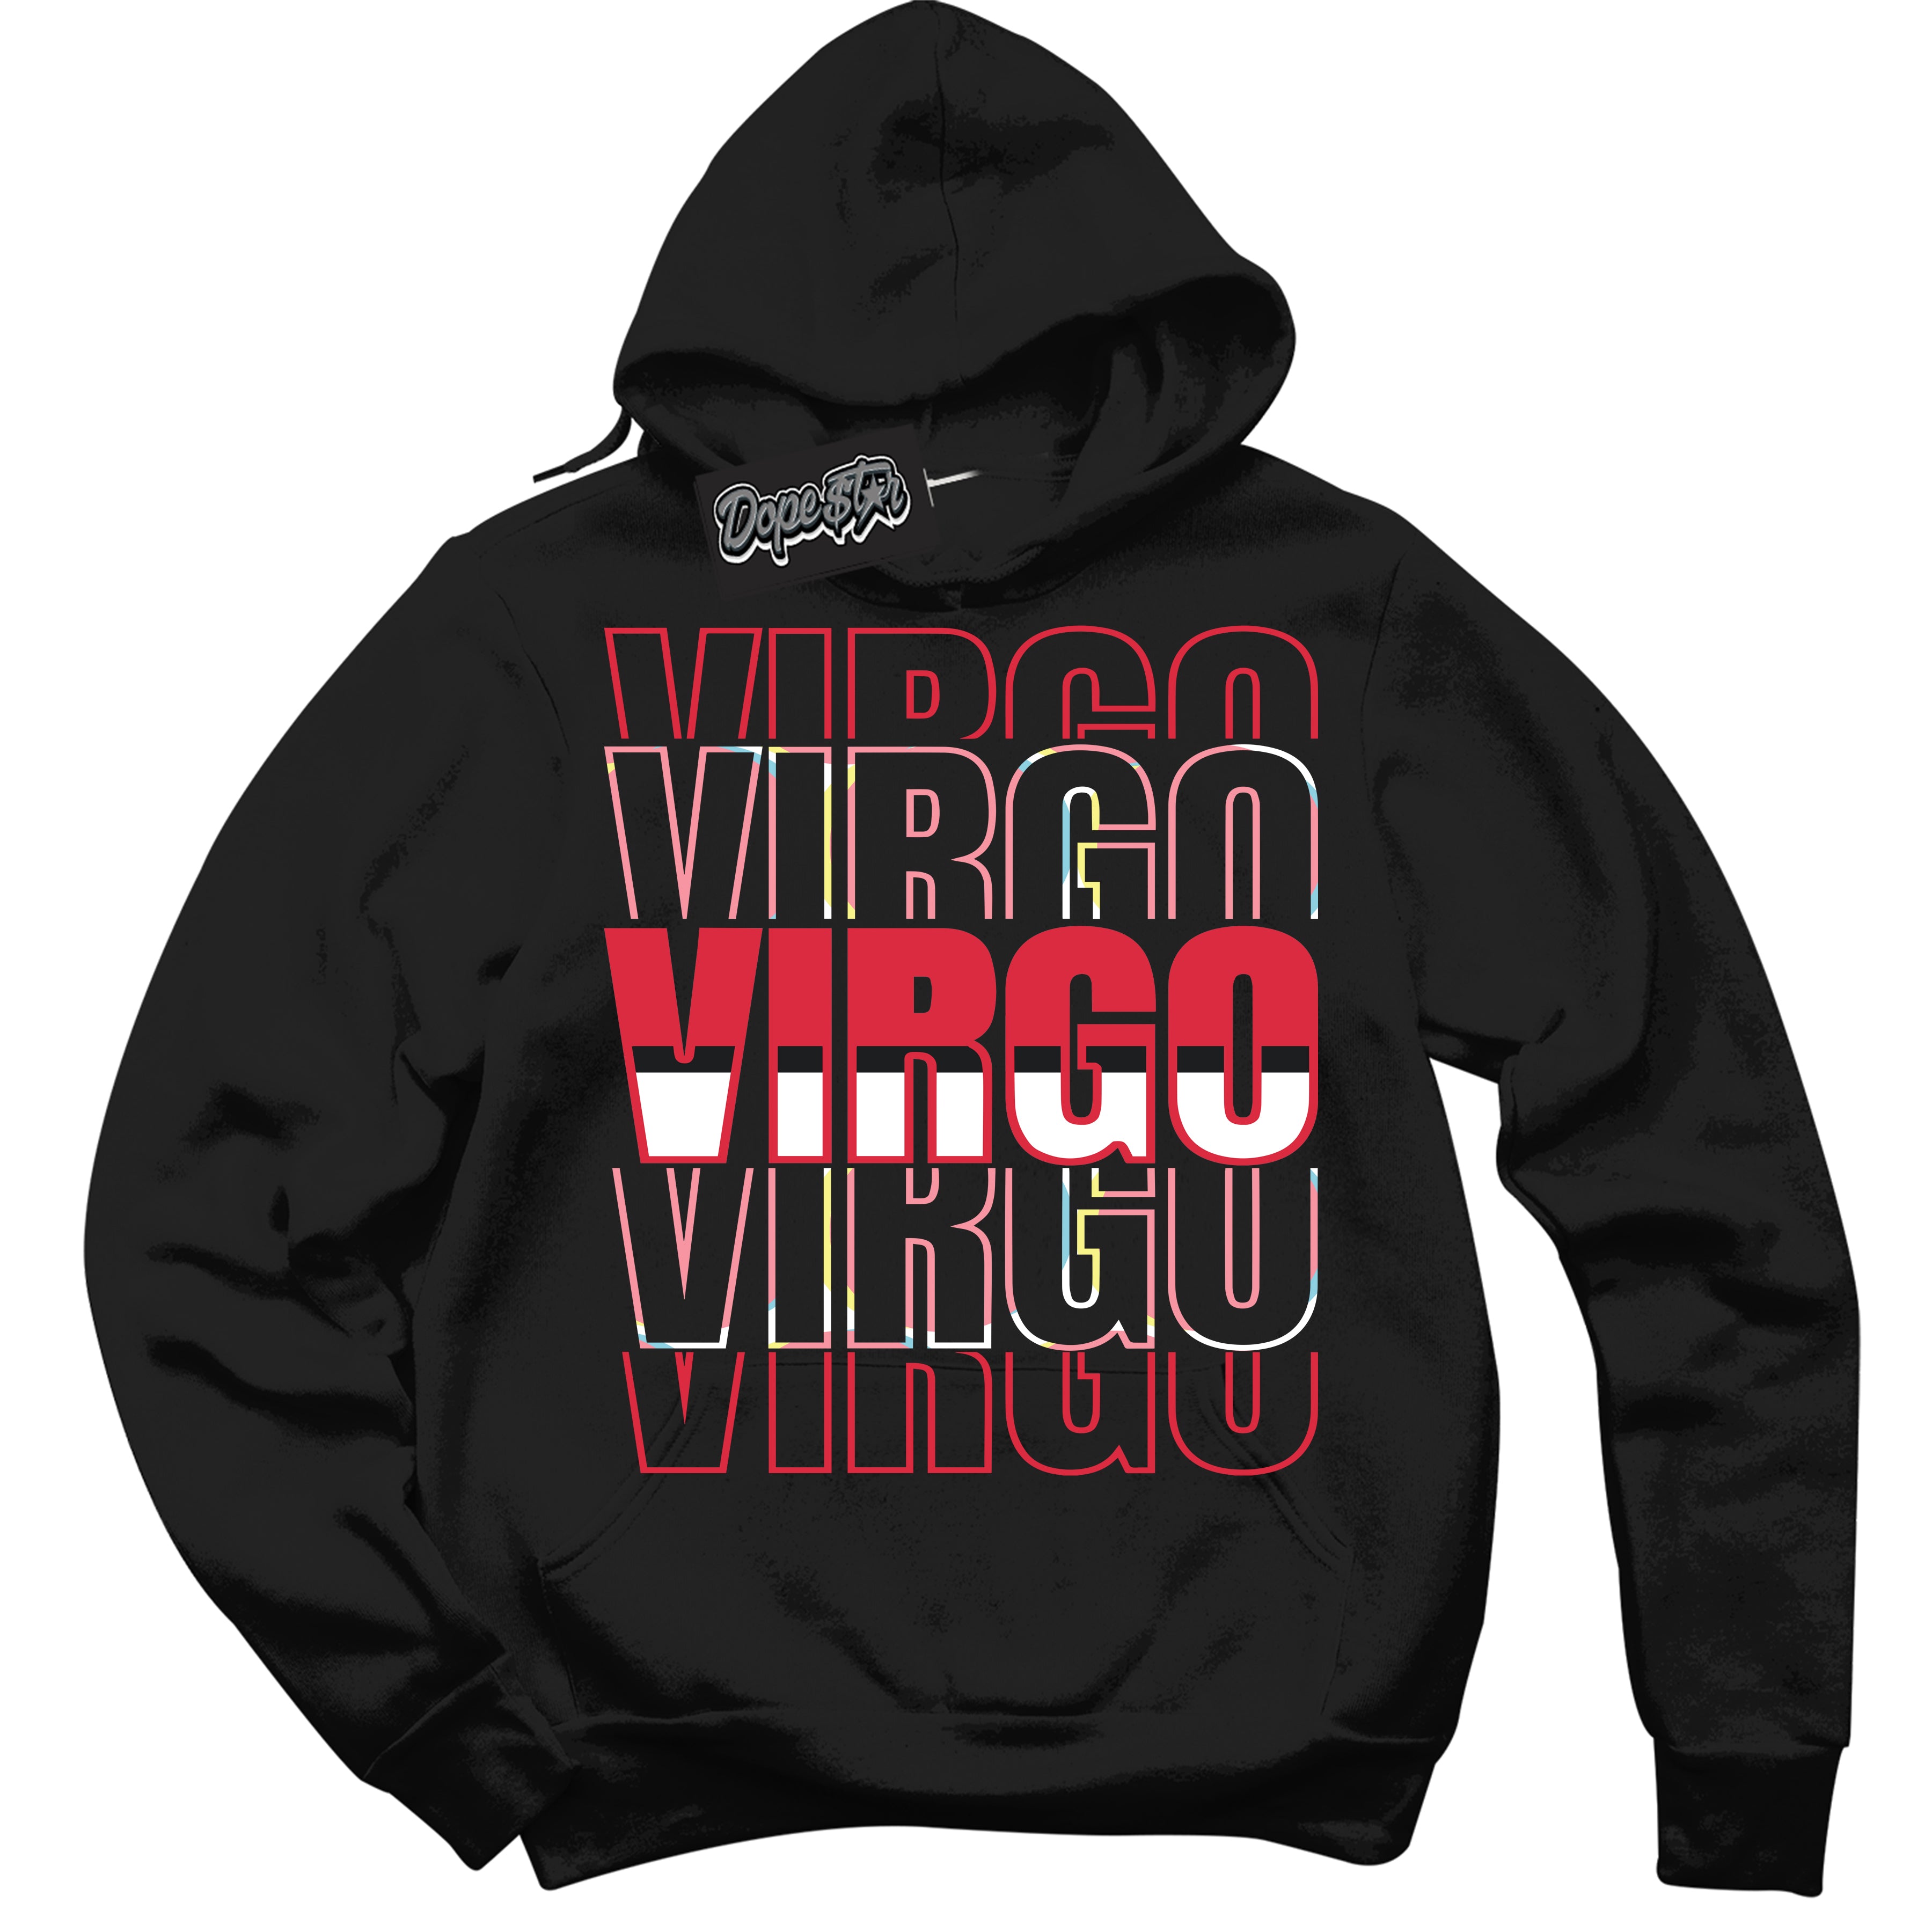 Cool Black Graphic DopeStar Hoodie with “ Virgo “ print, that perfectly matches Spider-Verse 1s sneakers